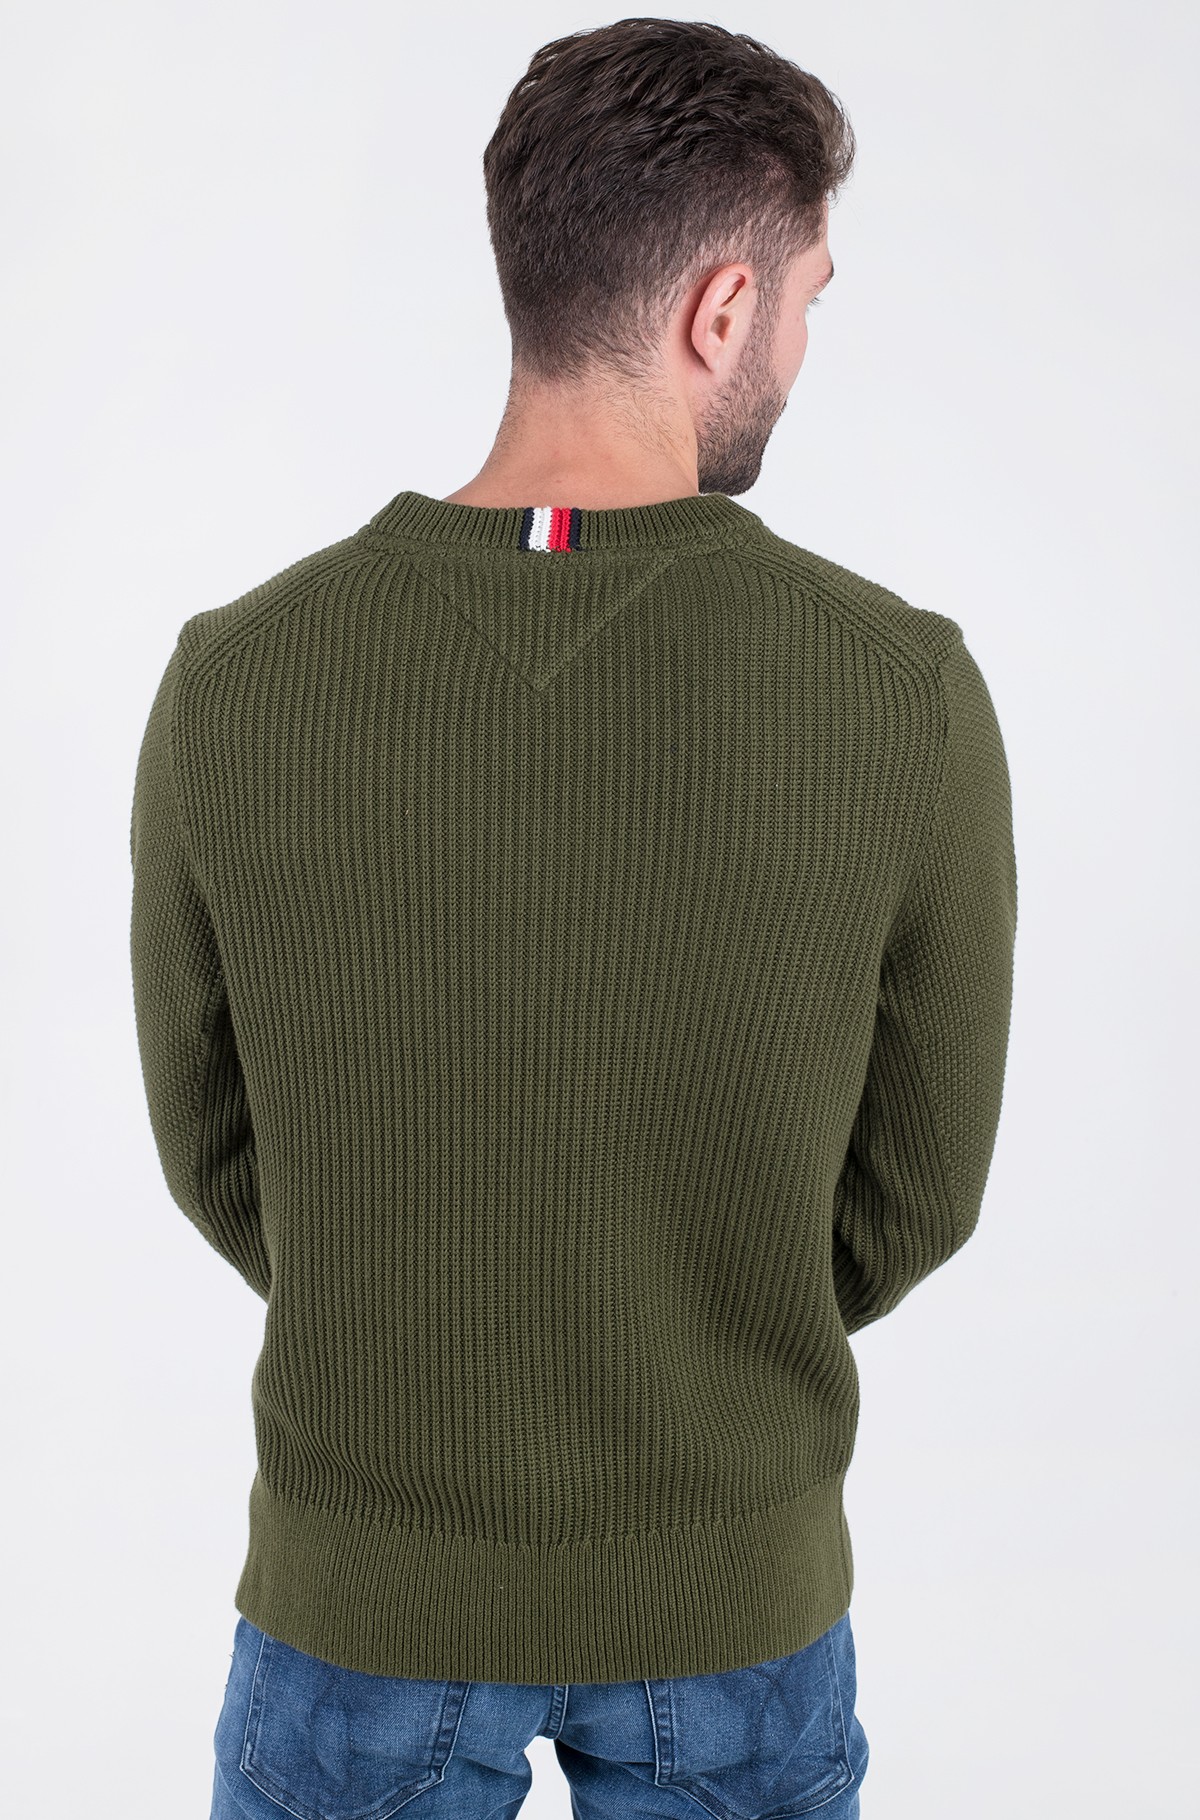 Forfalske analysere kilometer Sweater EXAGGERATED STRUCTURE CREW NECK Tommy Hilfiger, Mens Knitwear |  Denim Dream E-pood